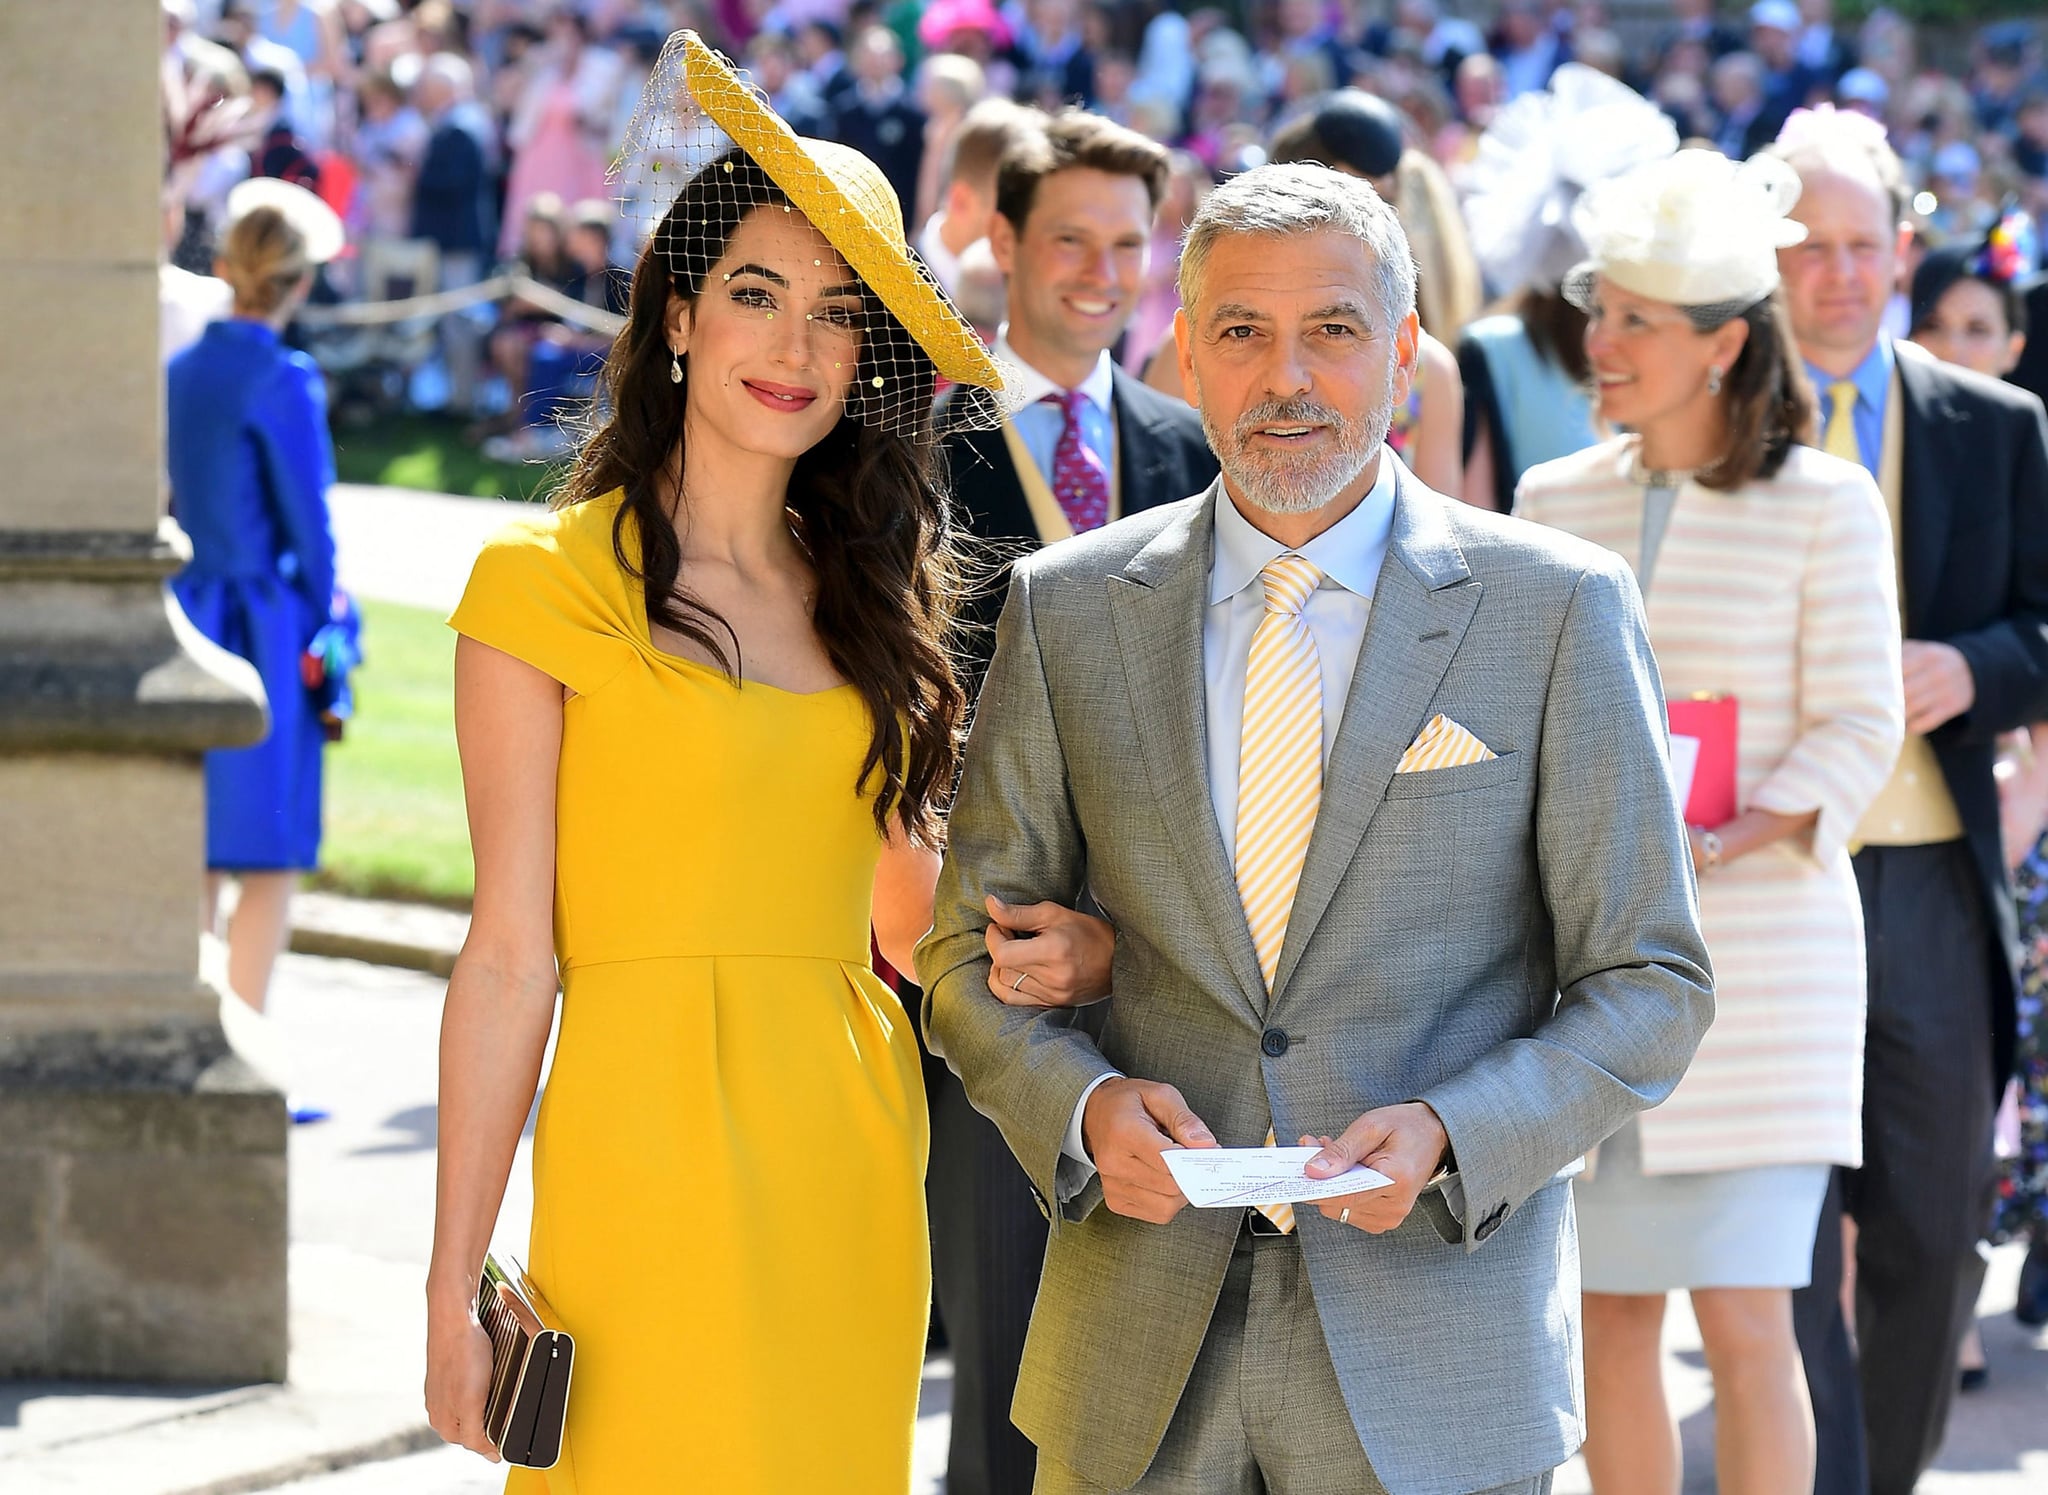 US actor George Clooney (R) and his wife British lawyer Amal Clooney (L) arrive for the wedding ceremony of Britain's Prince Harry, Duke of Sussex and US actress Meghan Markle at St George's Chapel, Windsor Castle, in Windsor, on May 19, 2018. (Photo by Ian West / POOL / AFP)        (Photo credit should read IAN WEST/AFP/Getty Images)